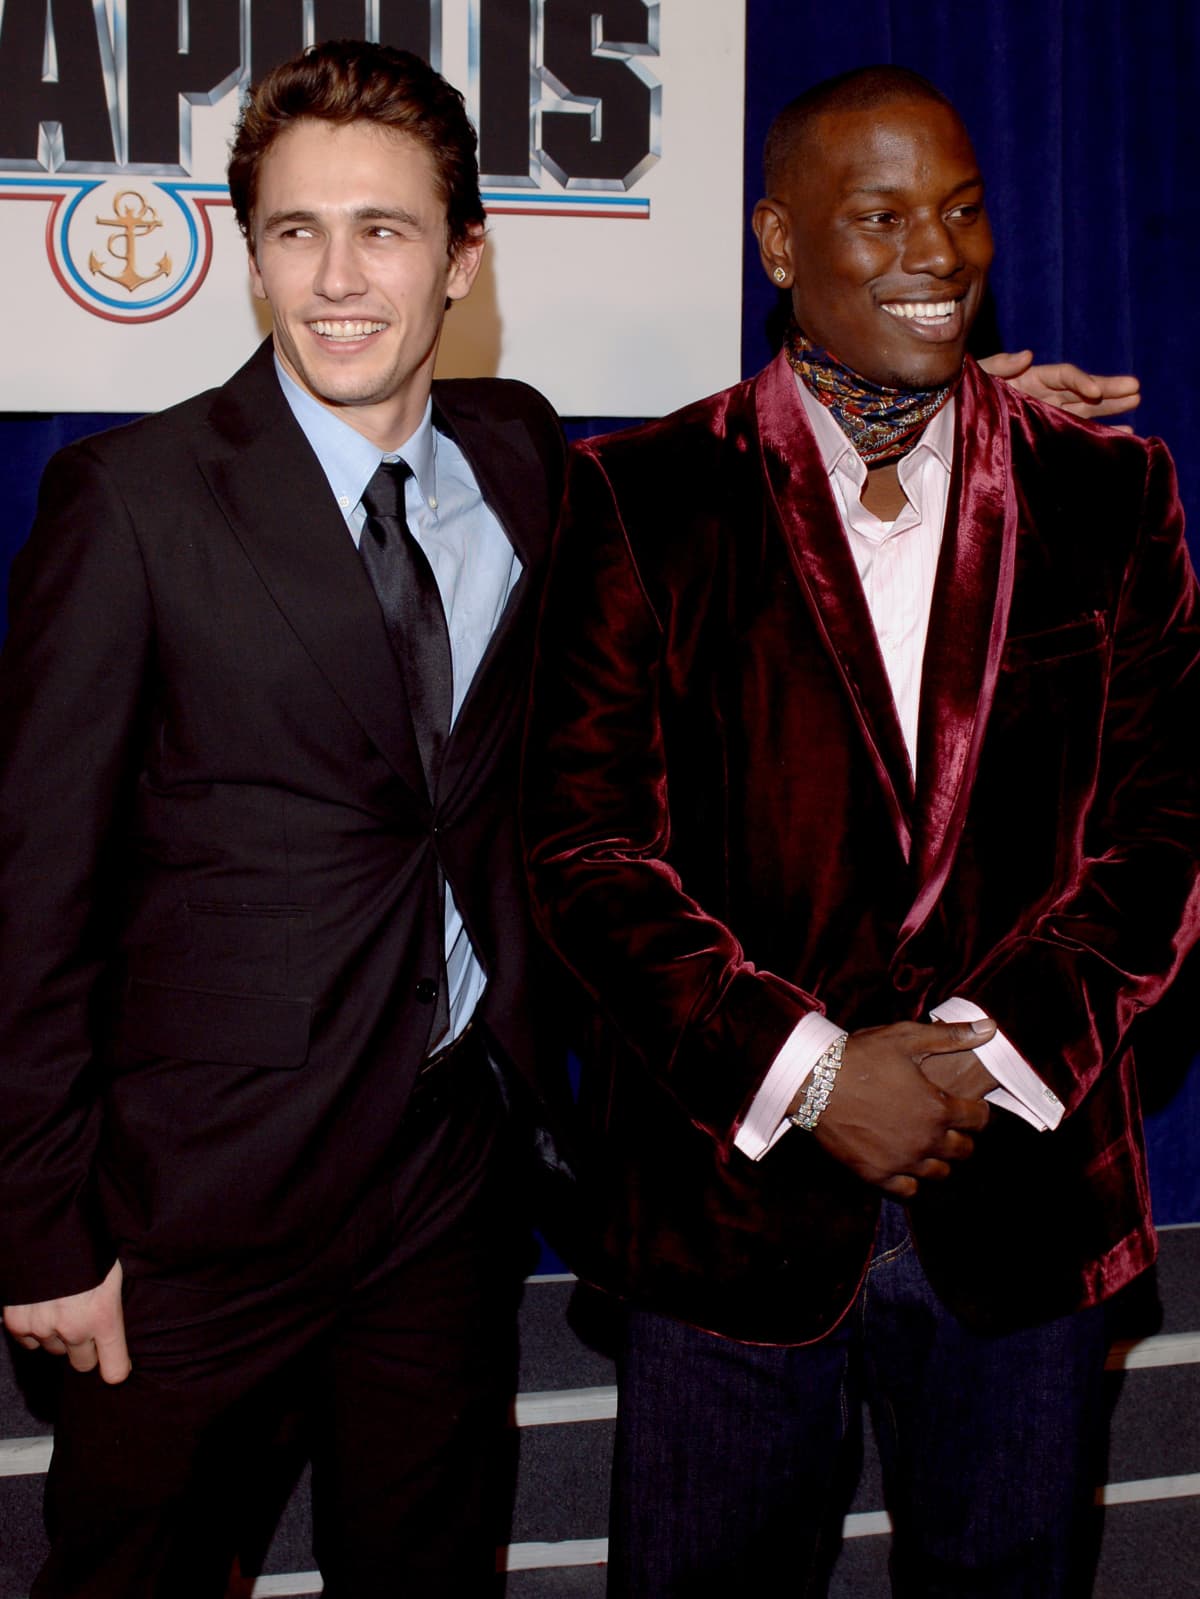 James Franco and Tyrese Gibson during Touchstone Pictures' "Annapolis" World Premiere - Red Carpet at El Capitan Theatre in Hollywood, California, United States. (Photo by L. Cohen/WireImage for Disney Pictures)